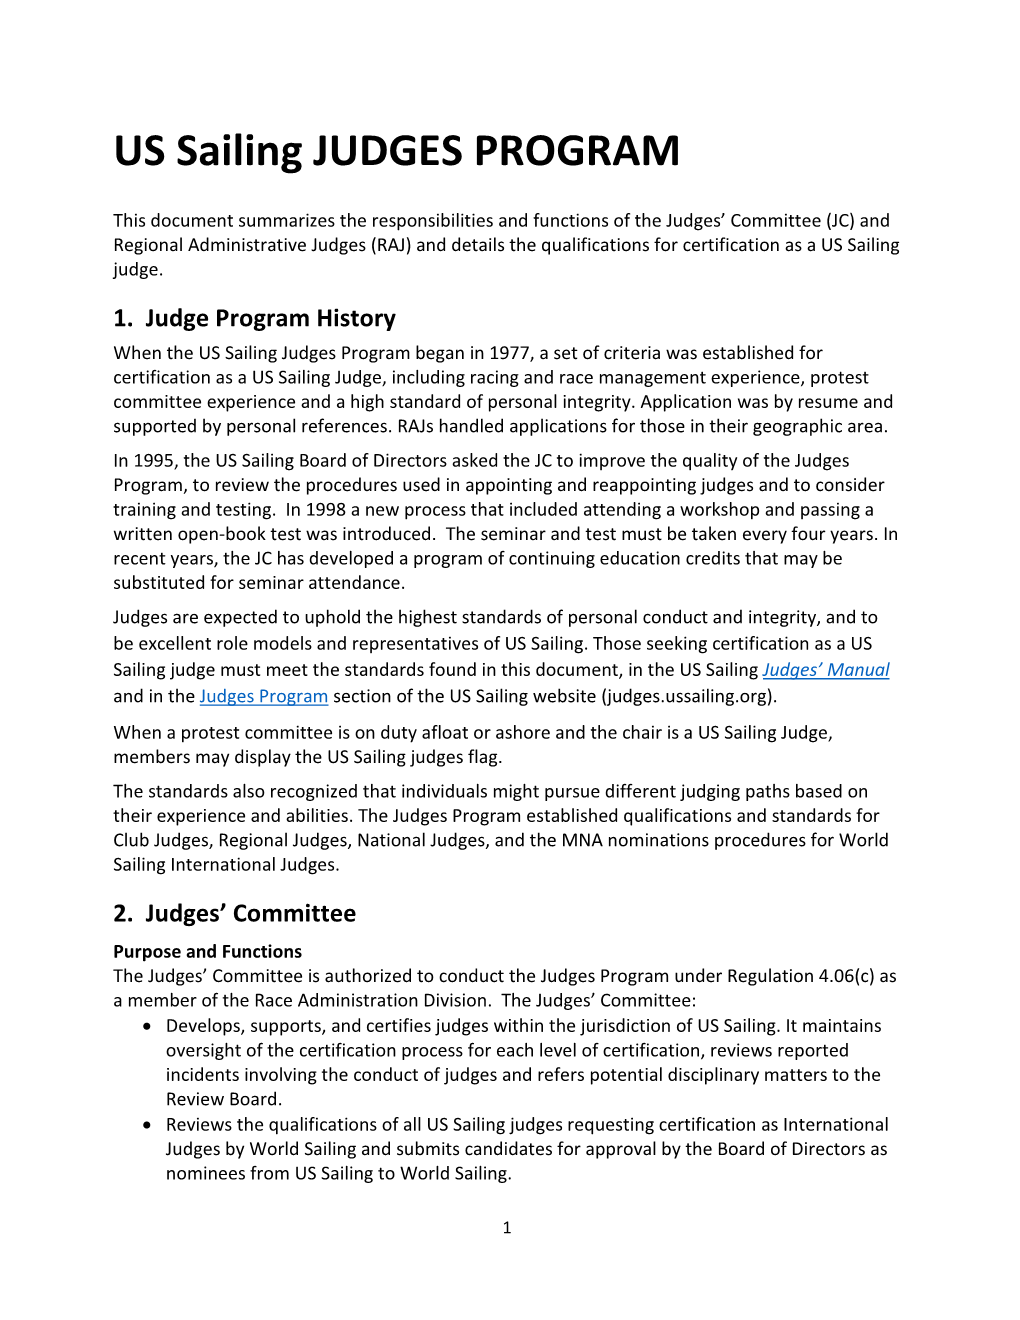 US Sailing Judge Certification Requirements